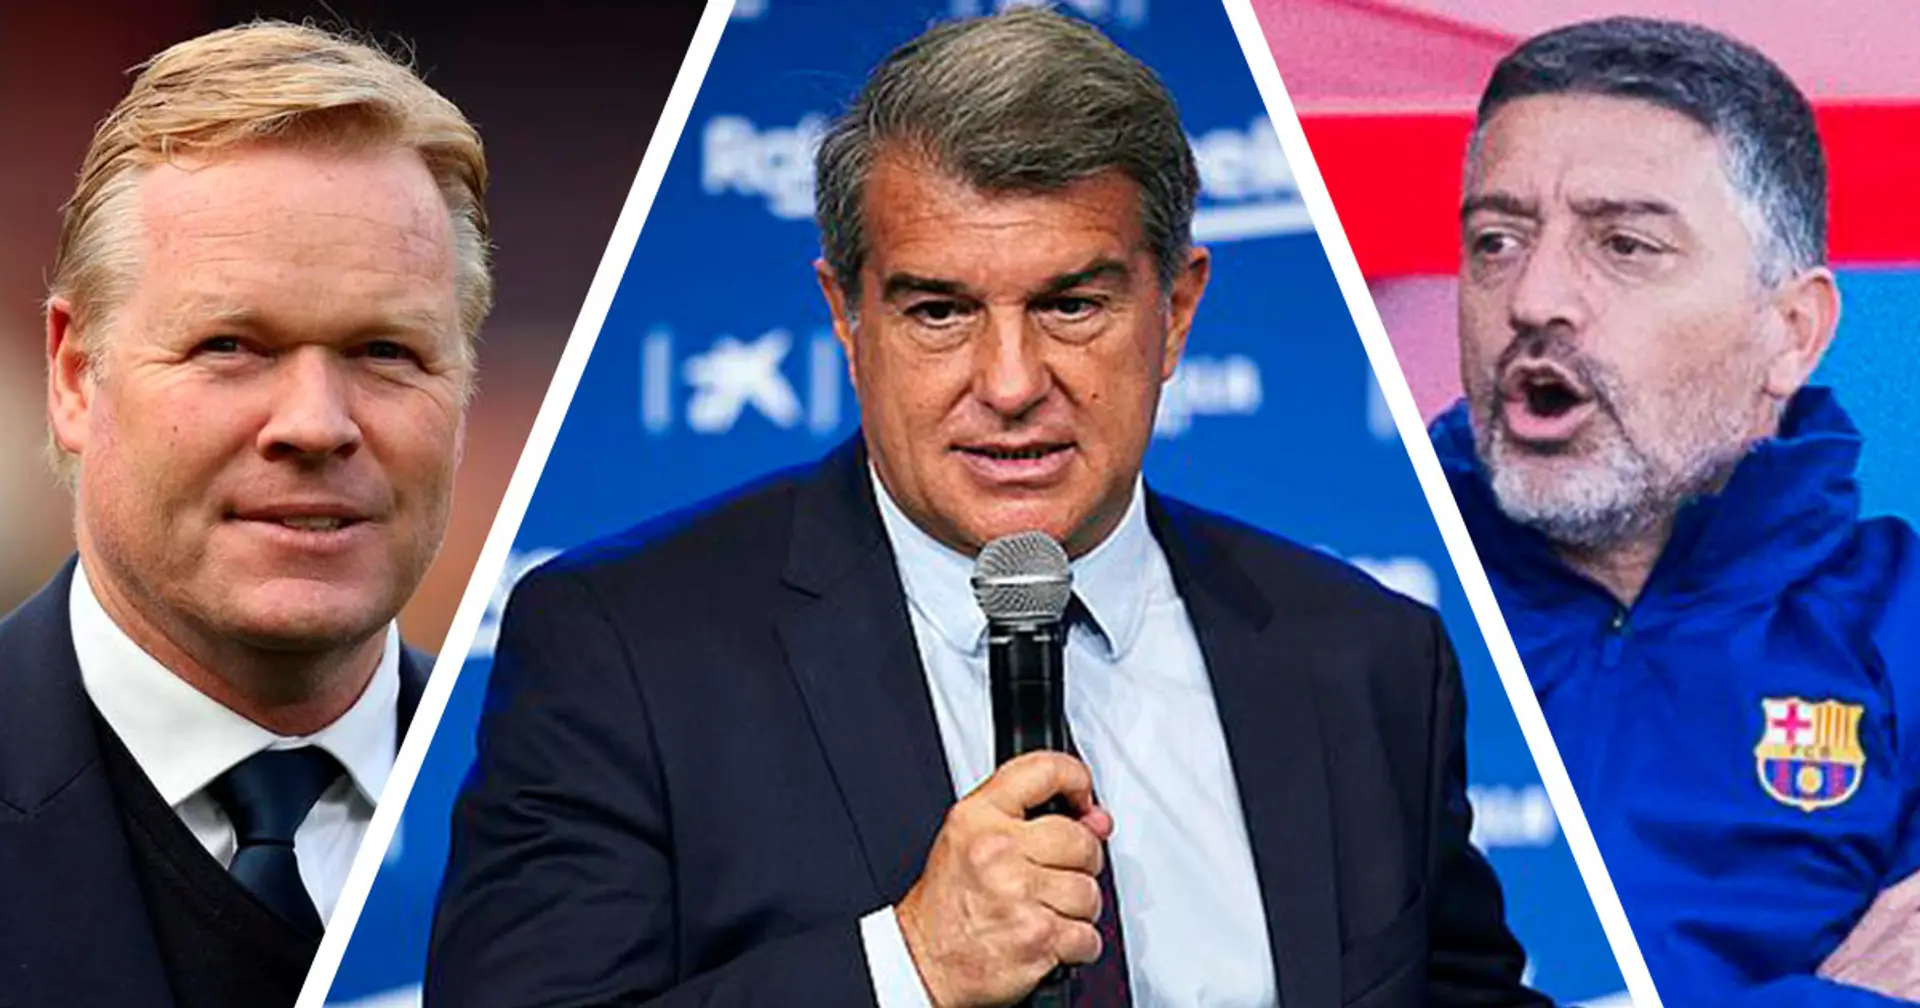 Keeping Koeman, signing 3 players, sacking Pimienta – how would you assess Laporta's 2nd Barca spell so far?